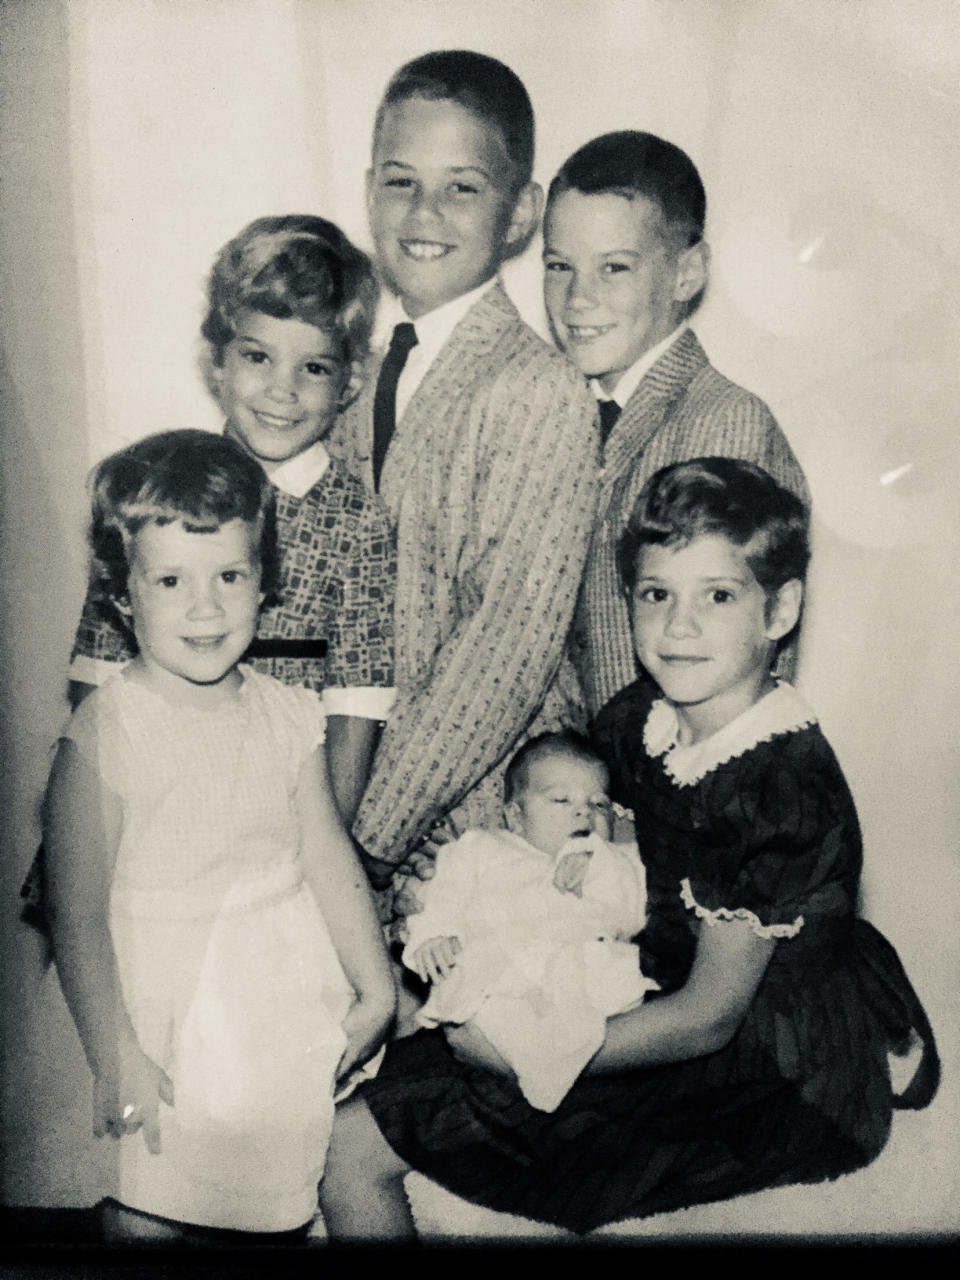 <i>Clockwise from lower left: </i>Marianne, Kathy, Michael, Tommy and Terry, who's holding Patrick. (The youngest son, Eddie, had not been born yet.) (Photo: Courtesy of Kathy Walsh)